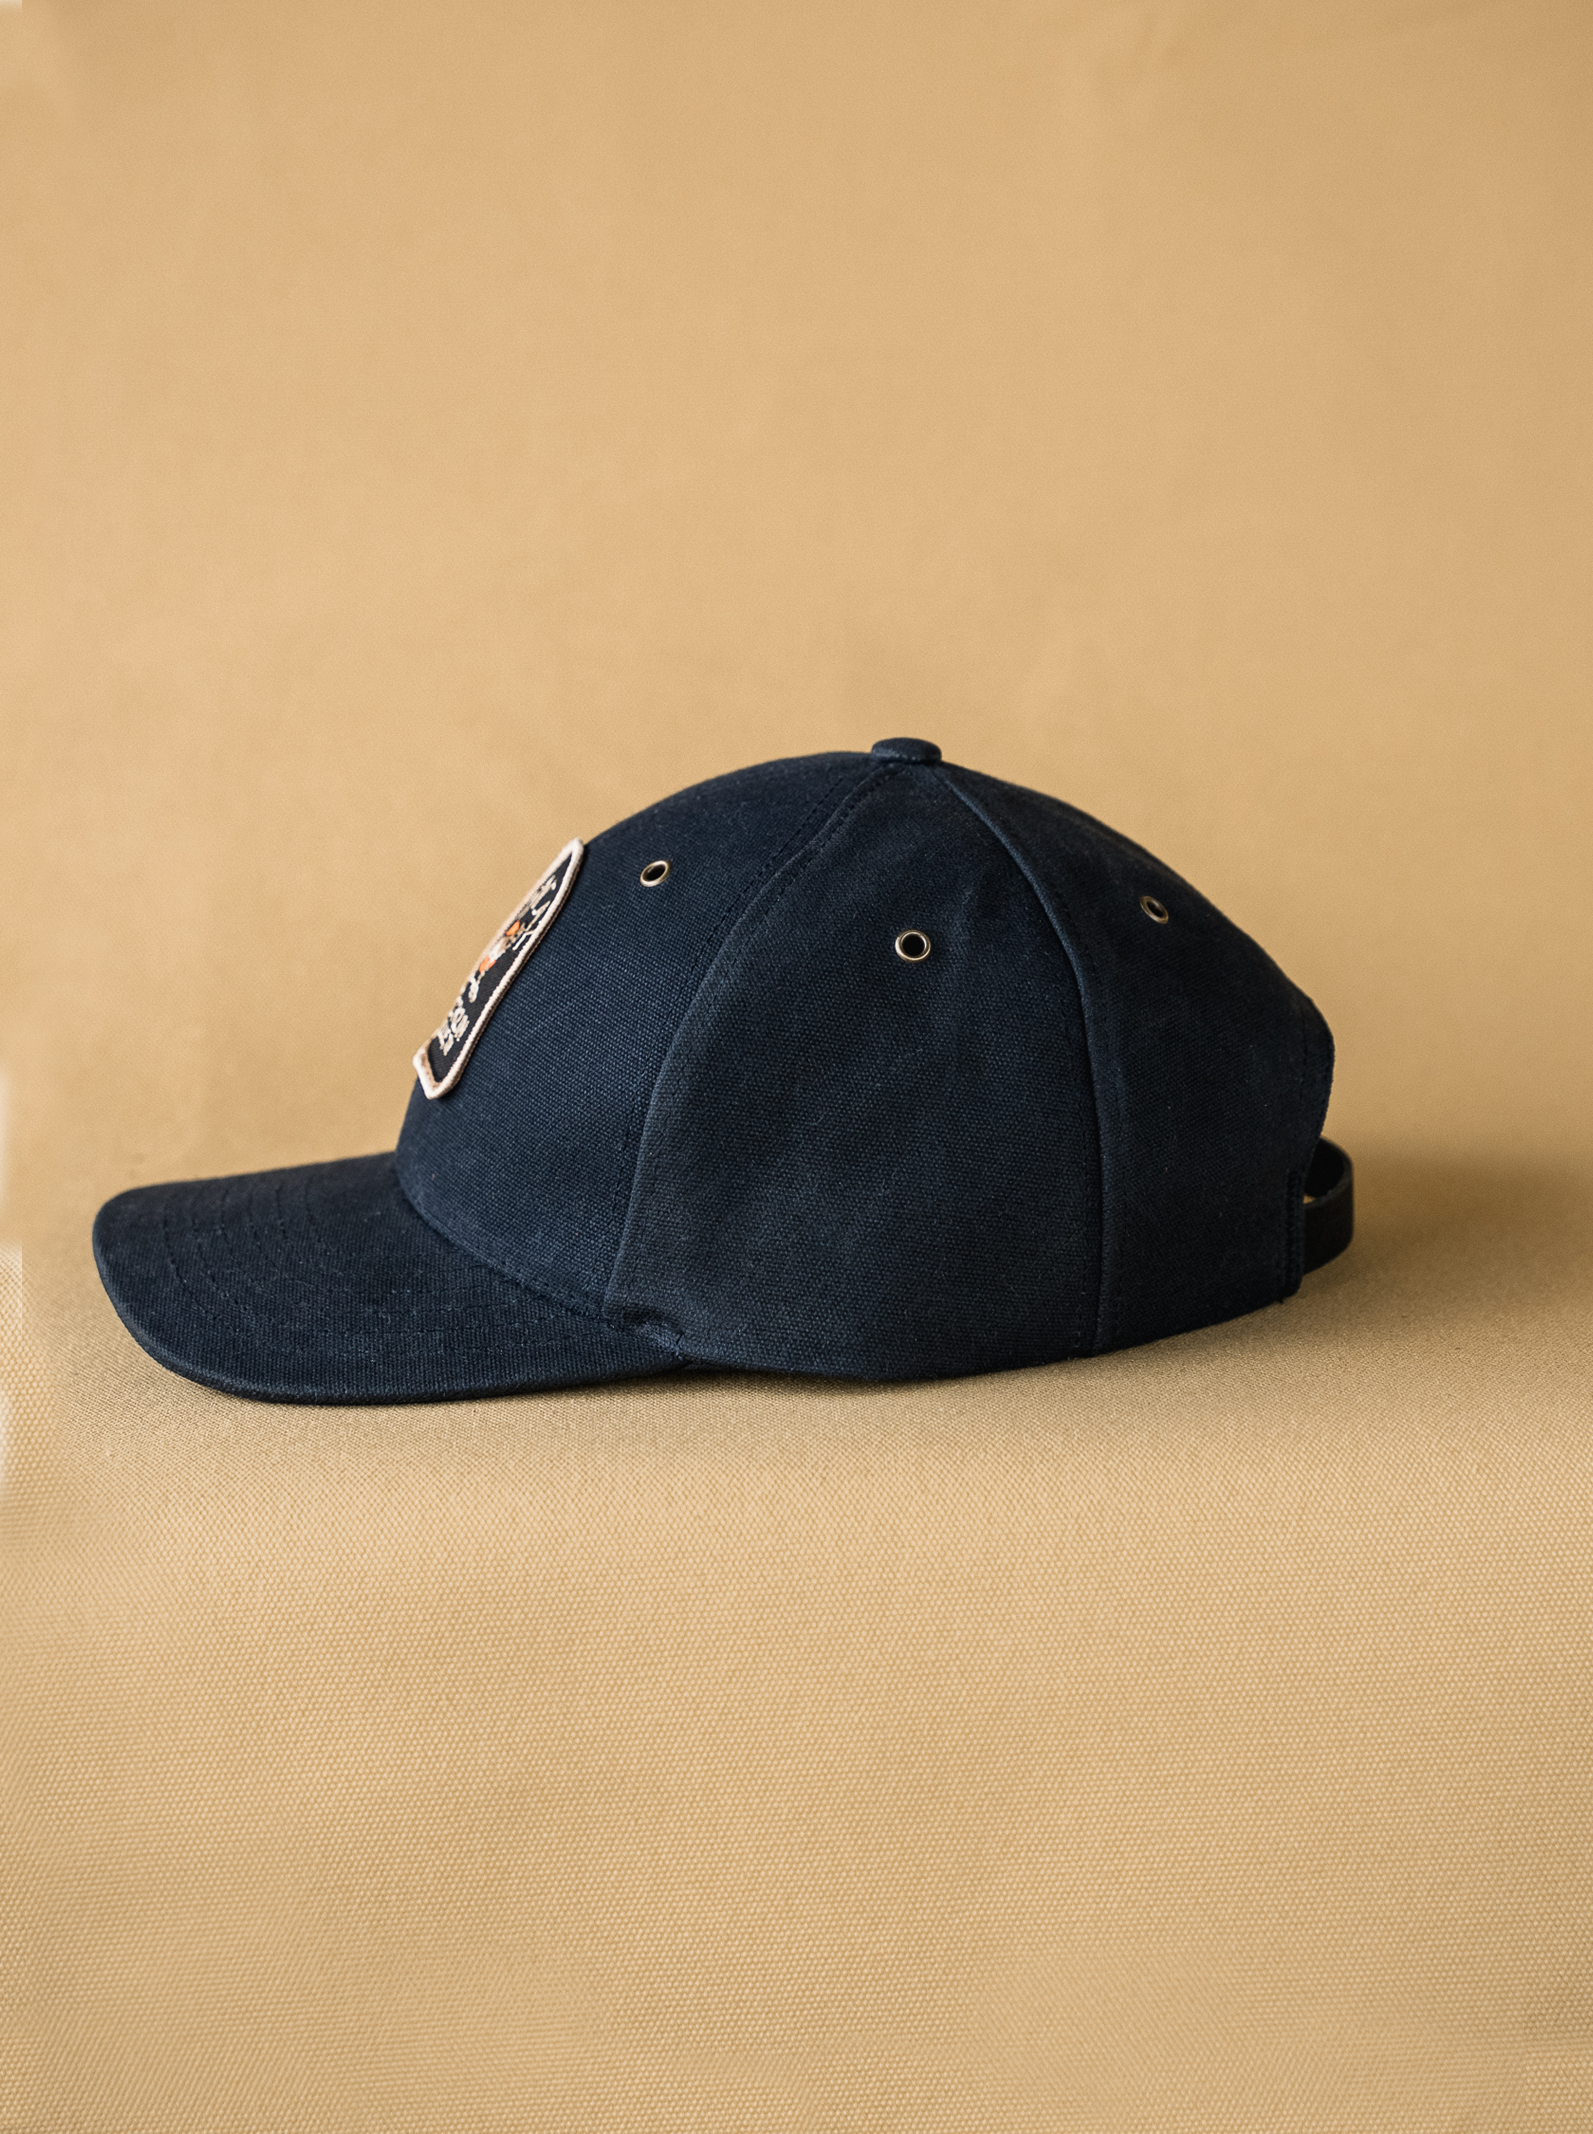 Waxed Canvas Baseball Hat - Black Wolf Patch